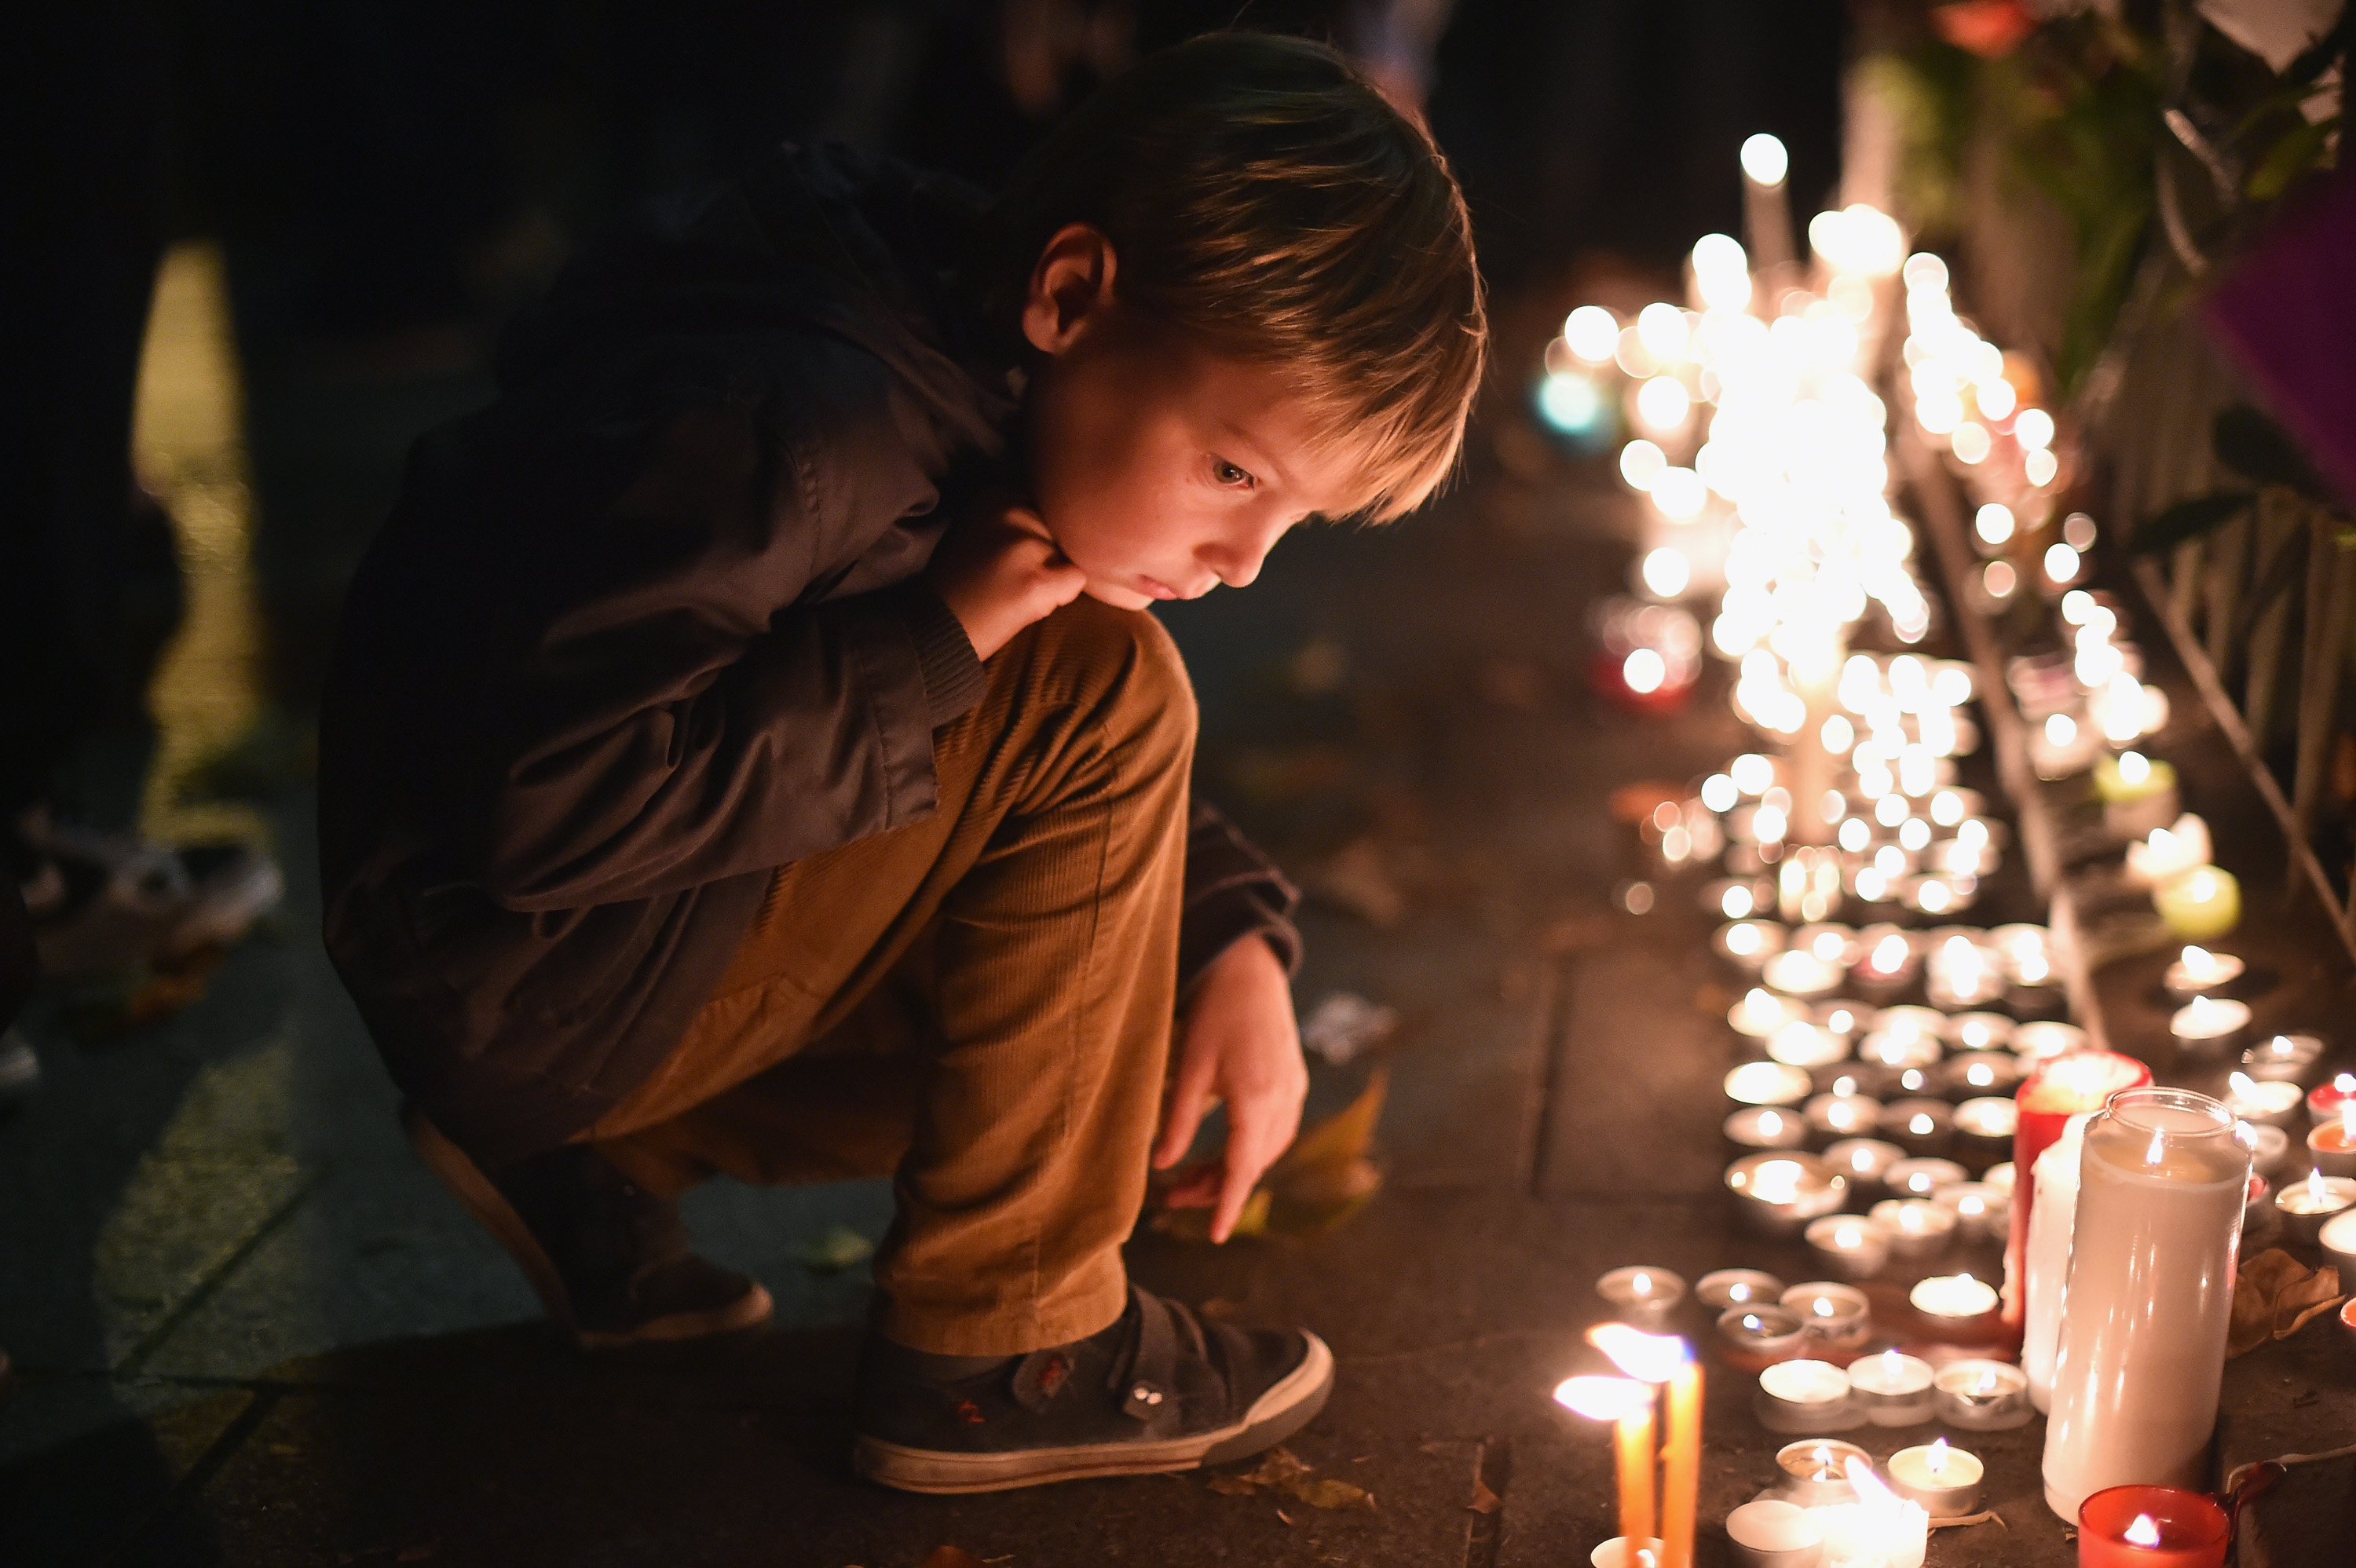 A young boy views tributes following terrorist attacks in Paris, on Nov. 16, 2015. (Jeff J Mitchell—Getty Images)